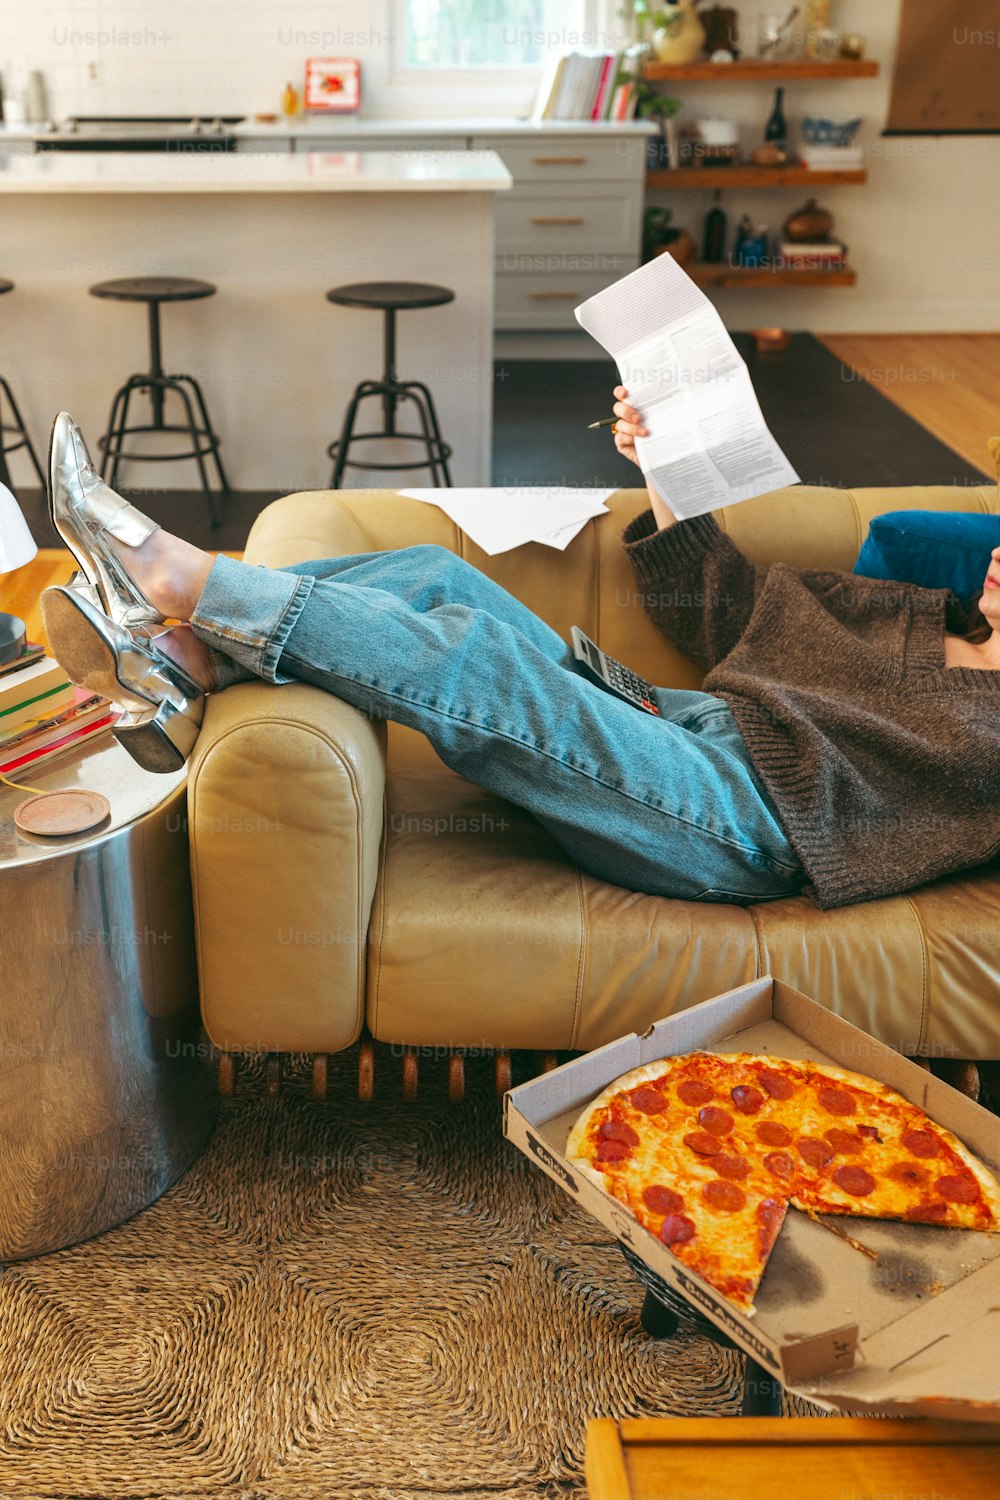 a person sitting on a couch reading a book and eating pizza